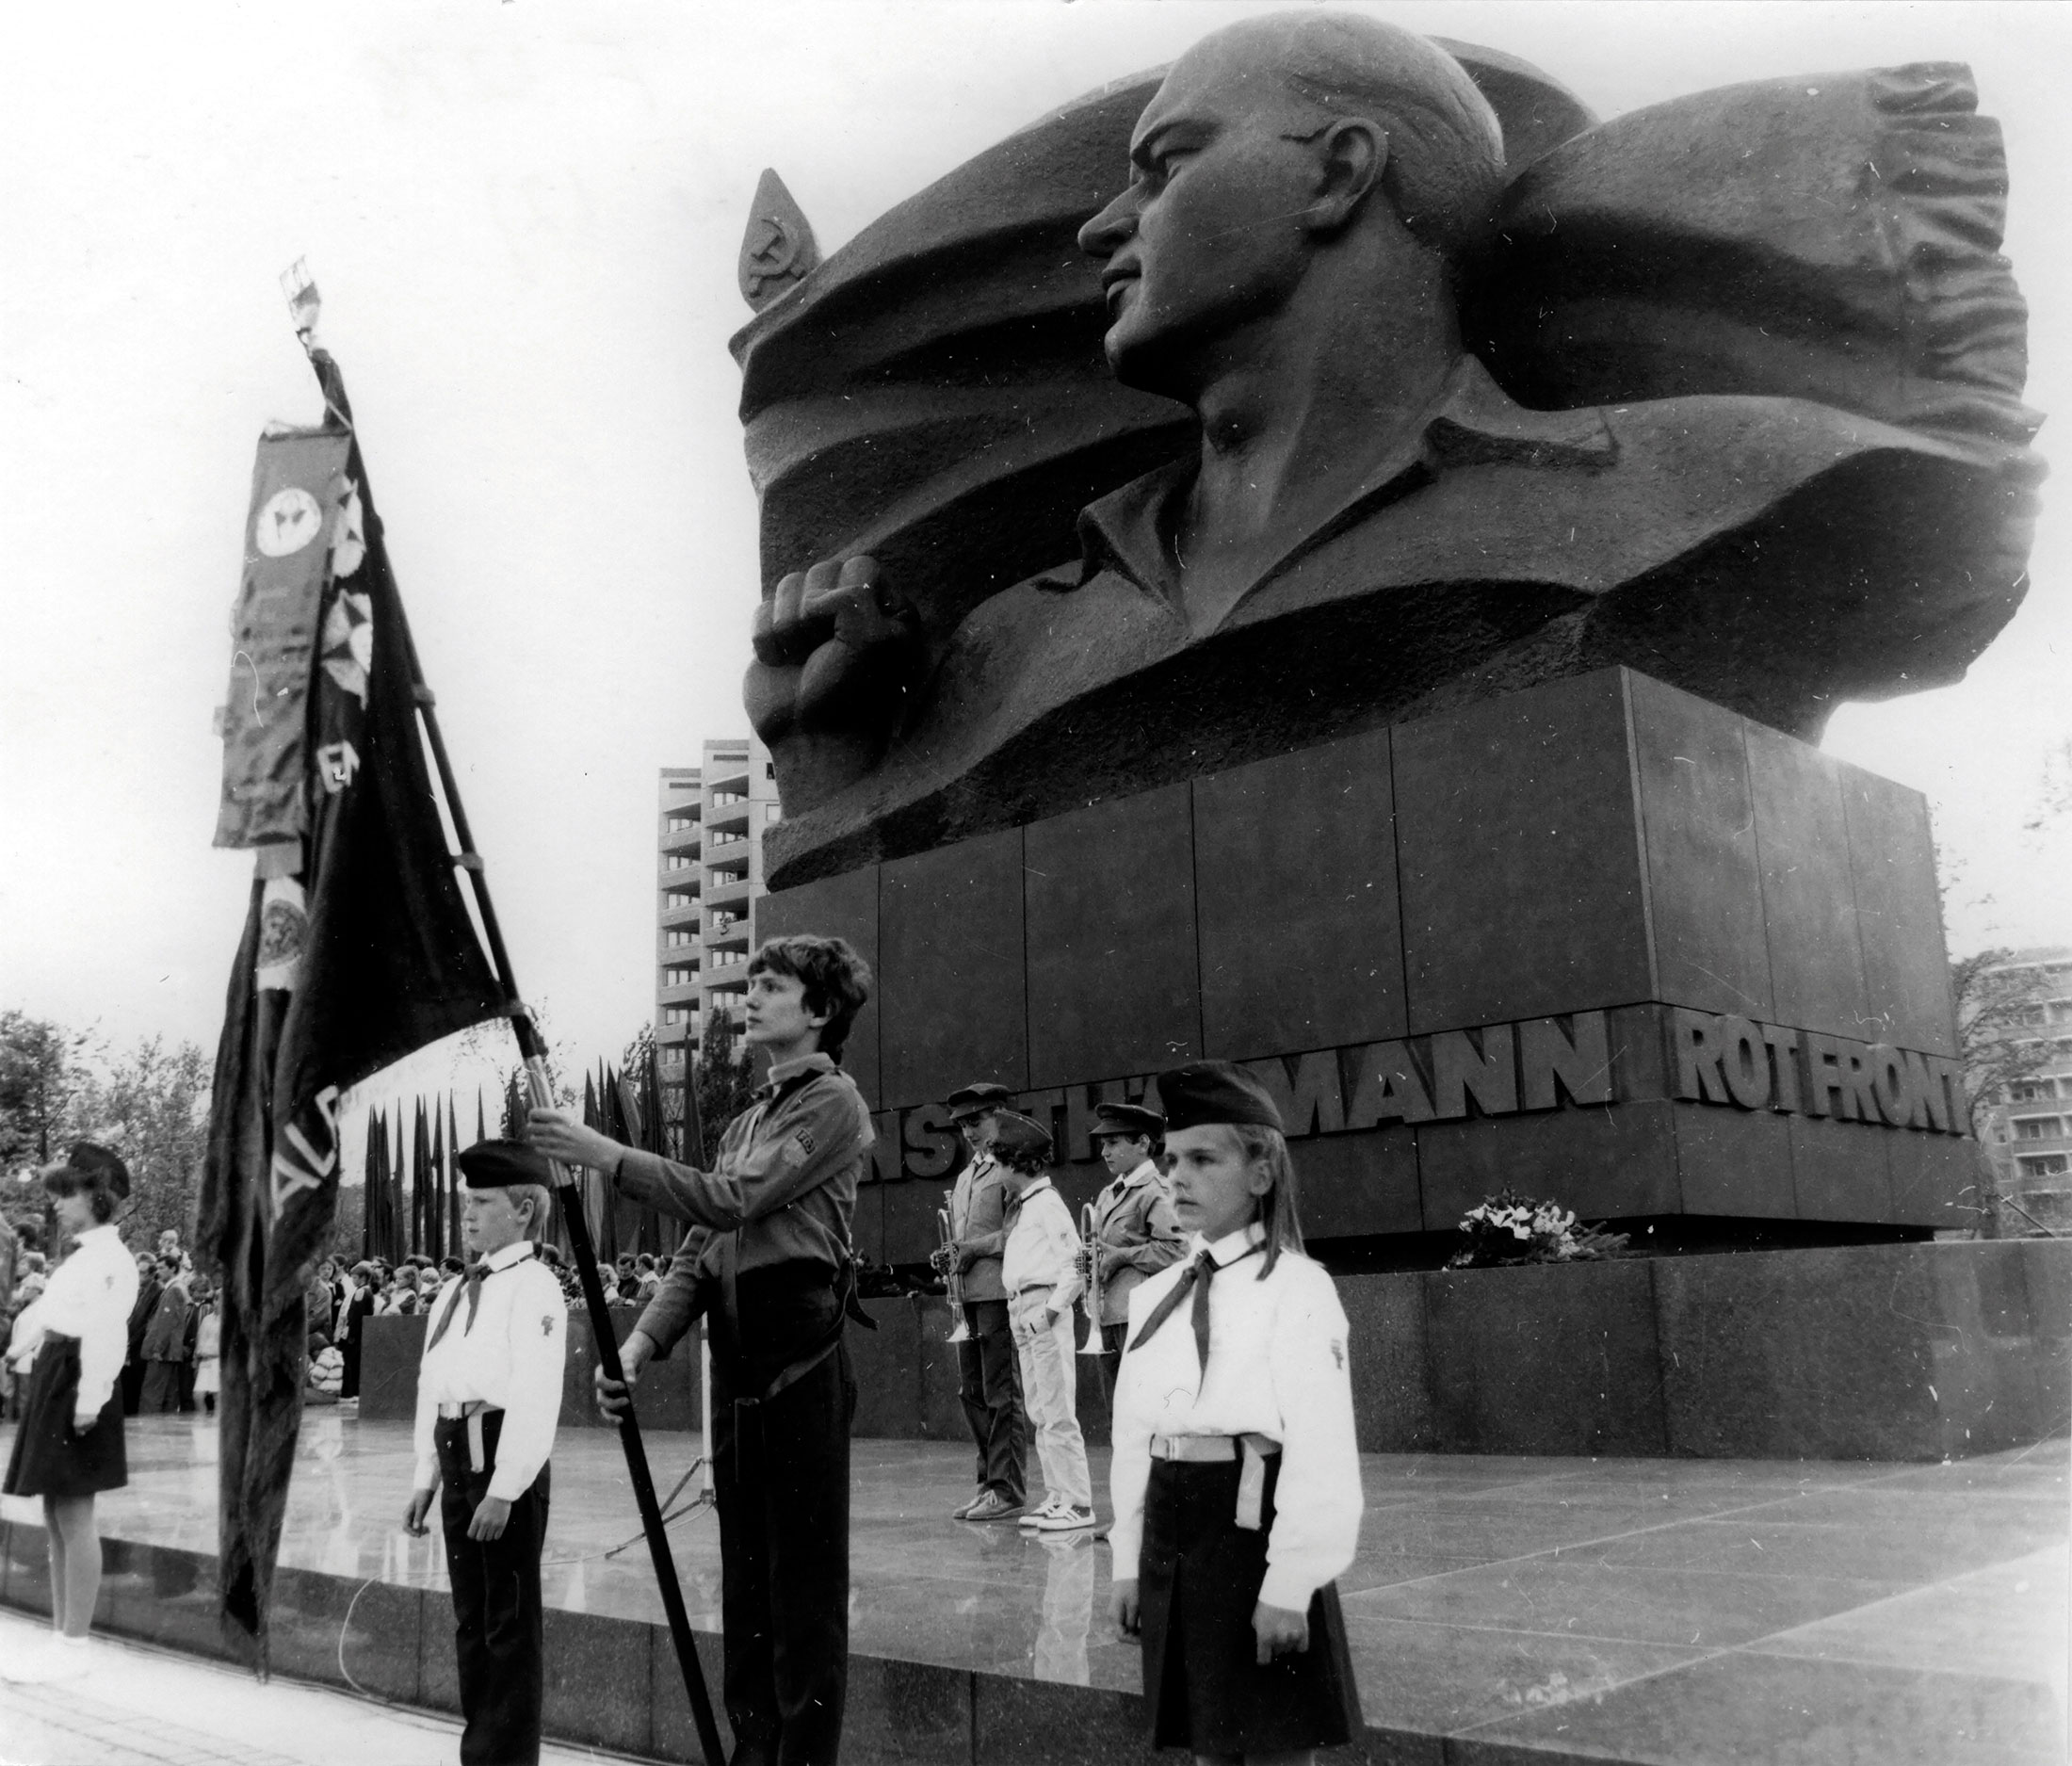 Vigil of “Young Pioneers“ in front of the Ernst Thälmann monument, 1986.